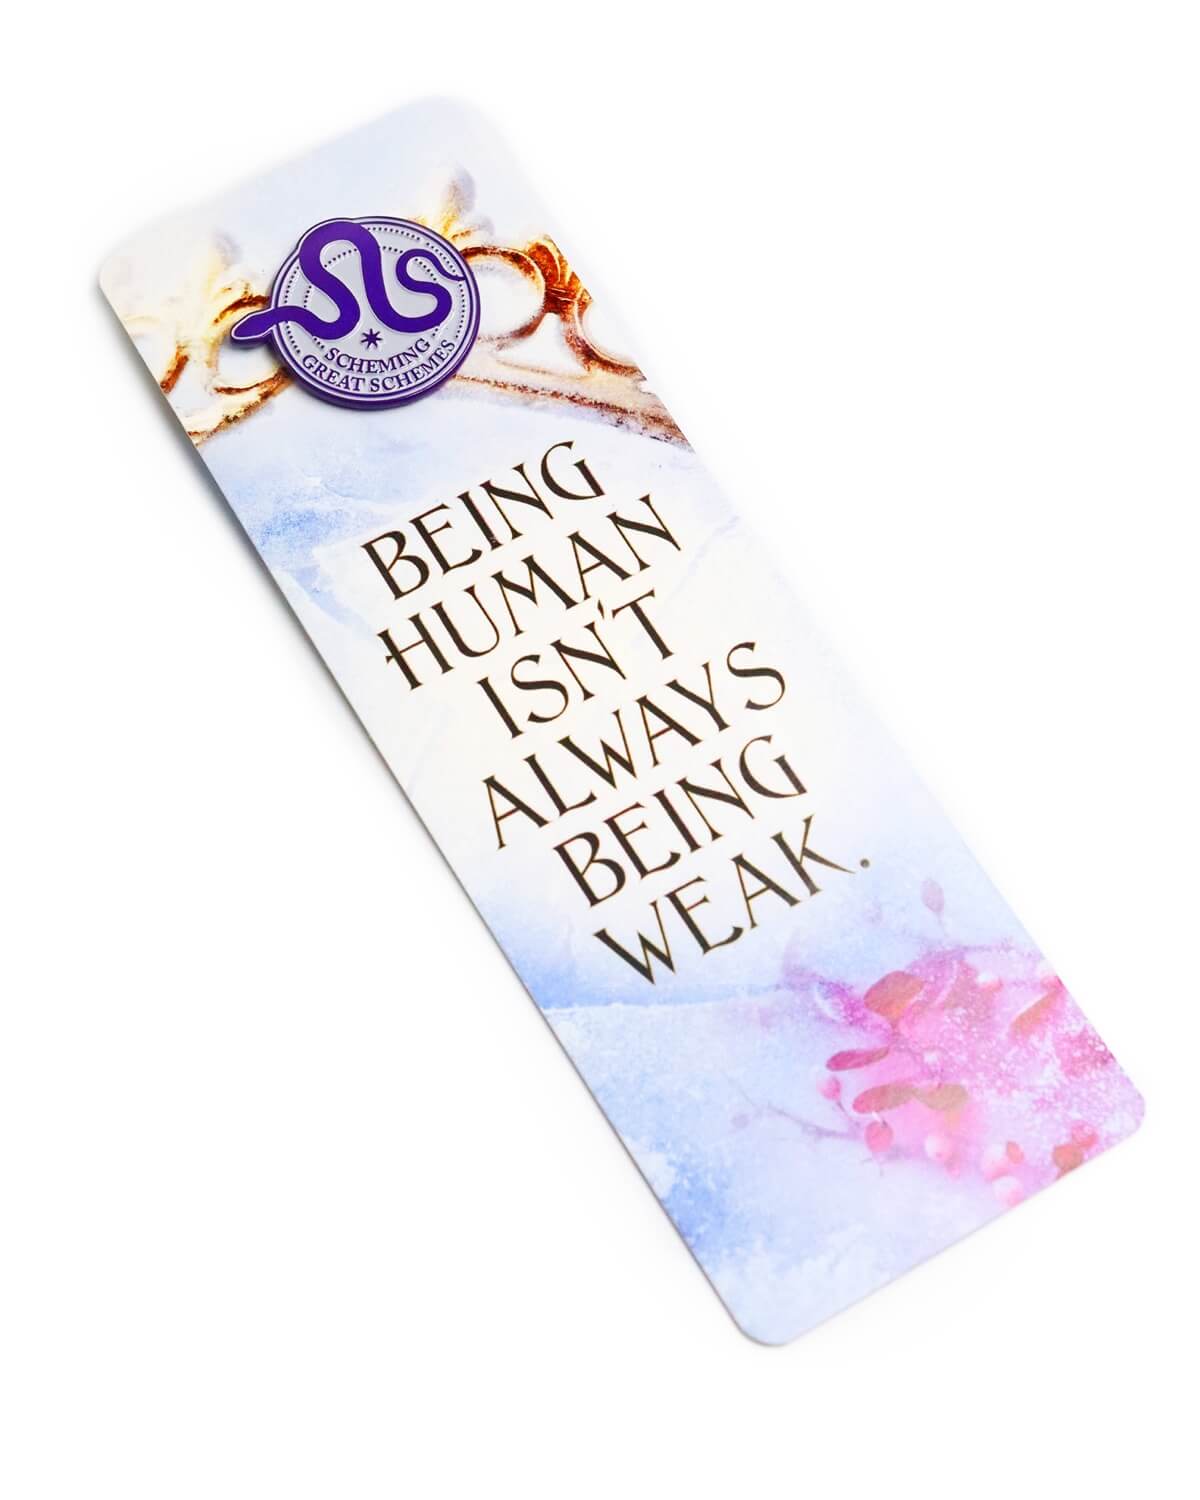 A pin badge attached to a bookmark.